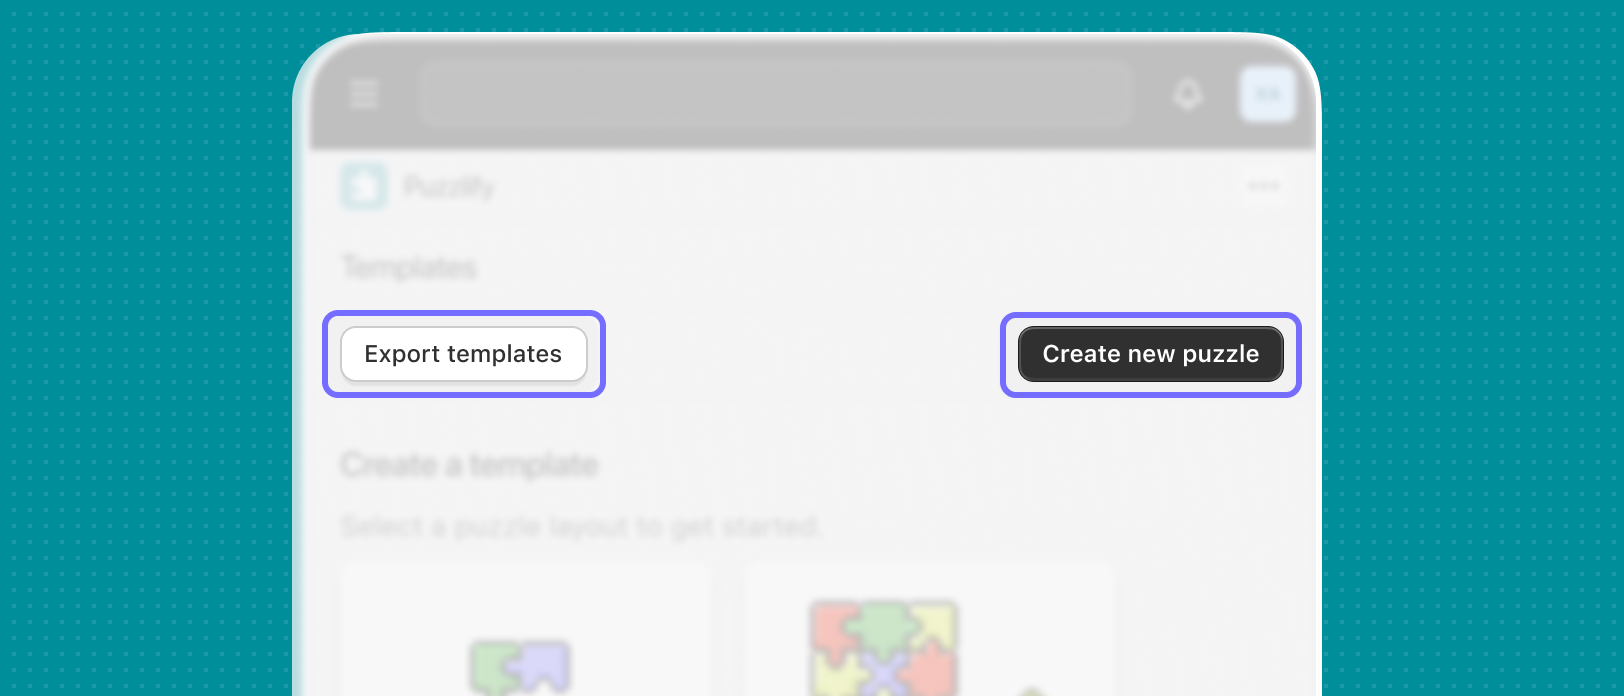 The page header with a primary button labeled ‘New template’ and a secondary button labeled ‘Export templates’ in focus.